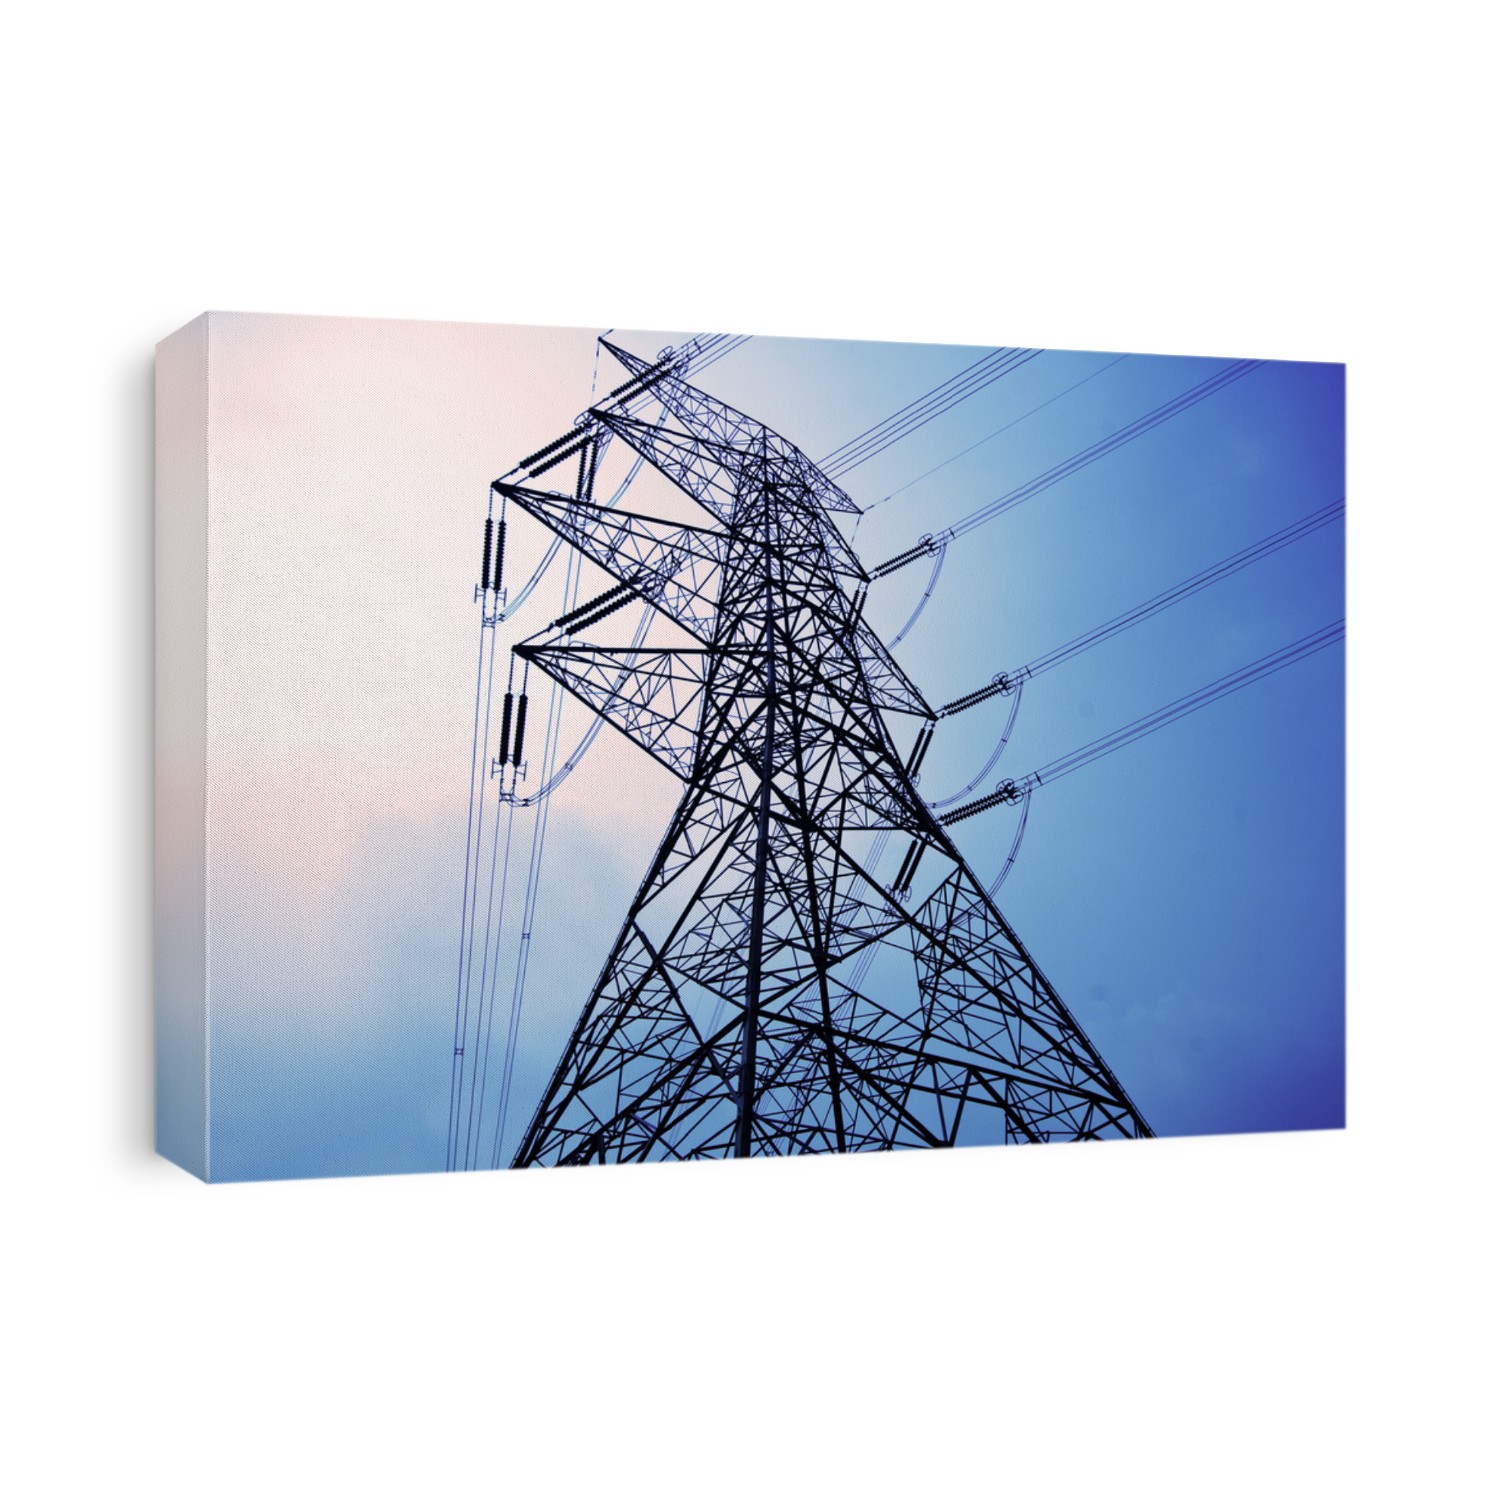 Electricity pylons with long cable at day